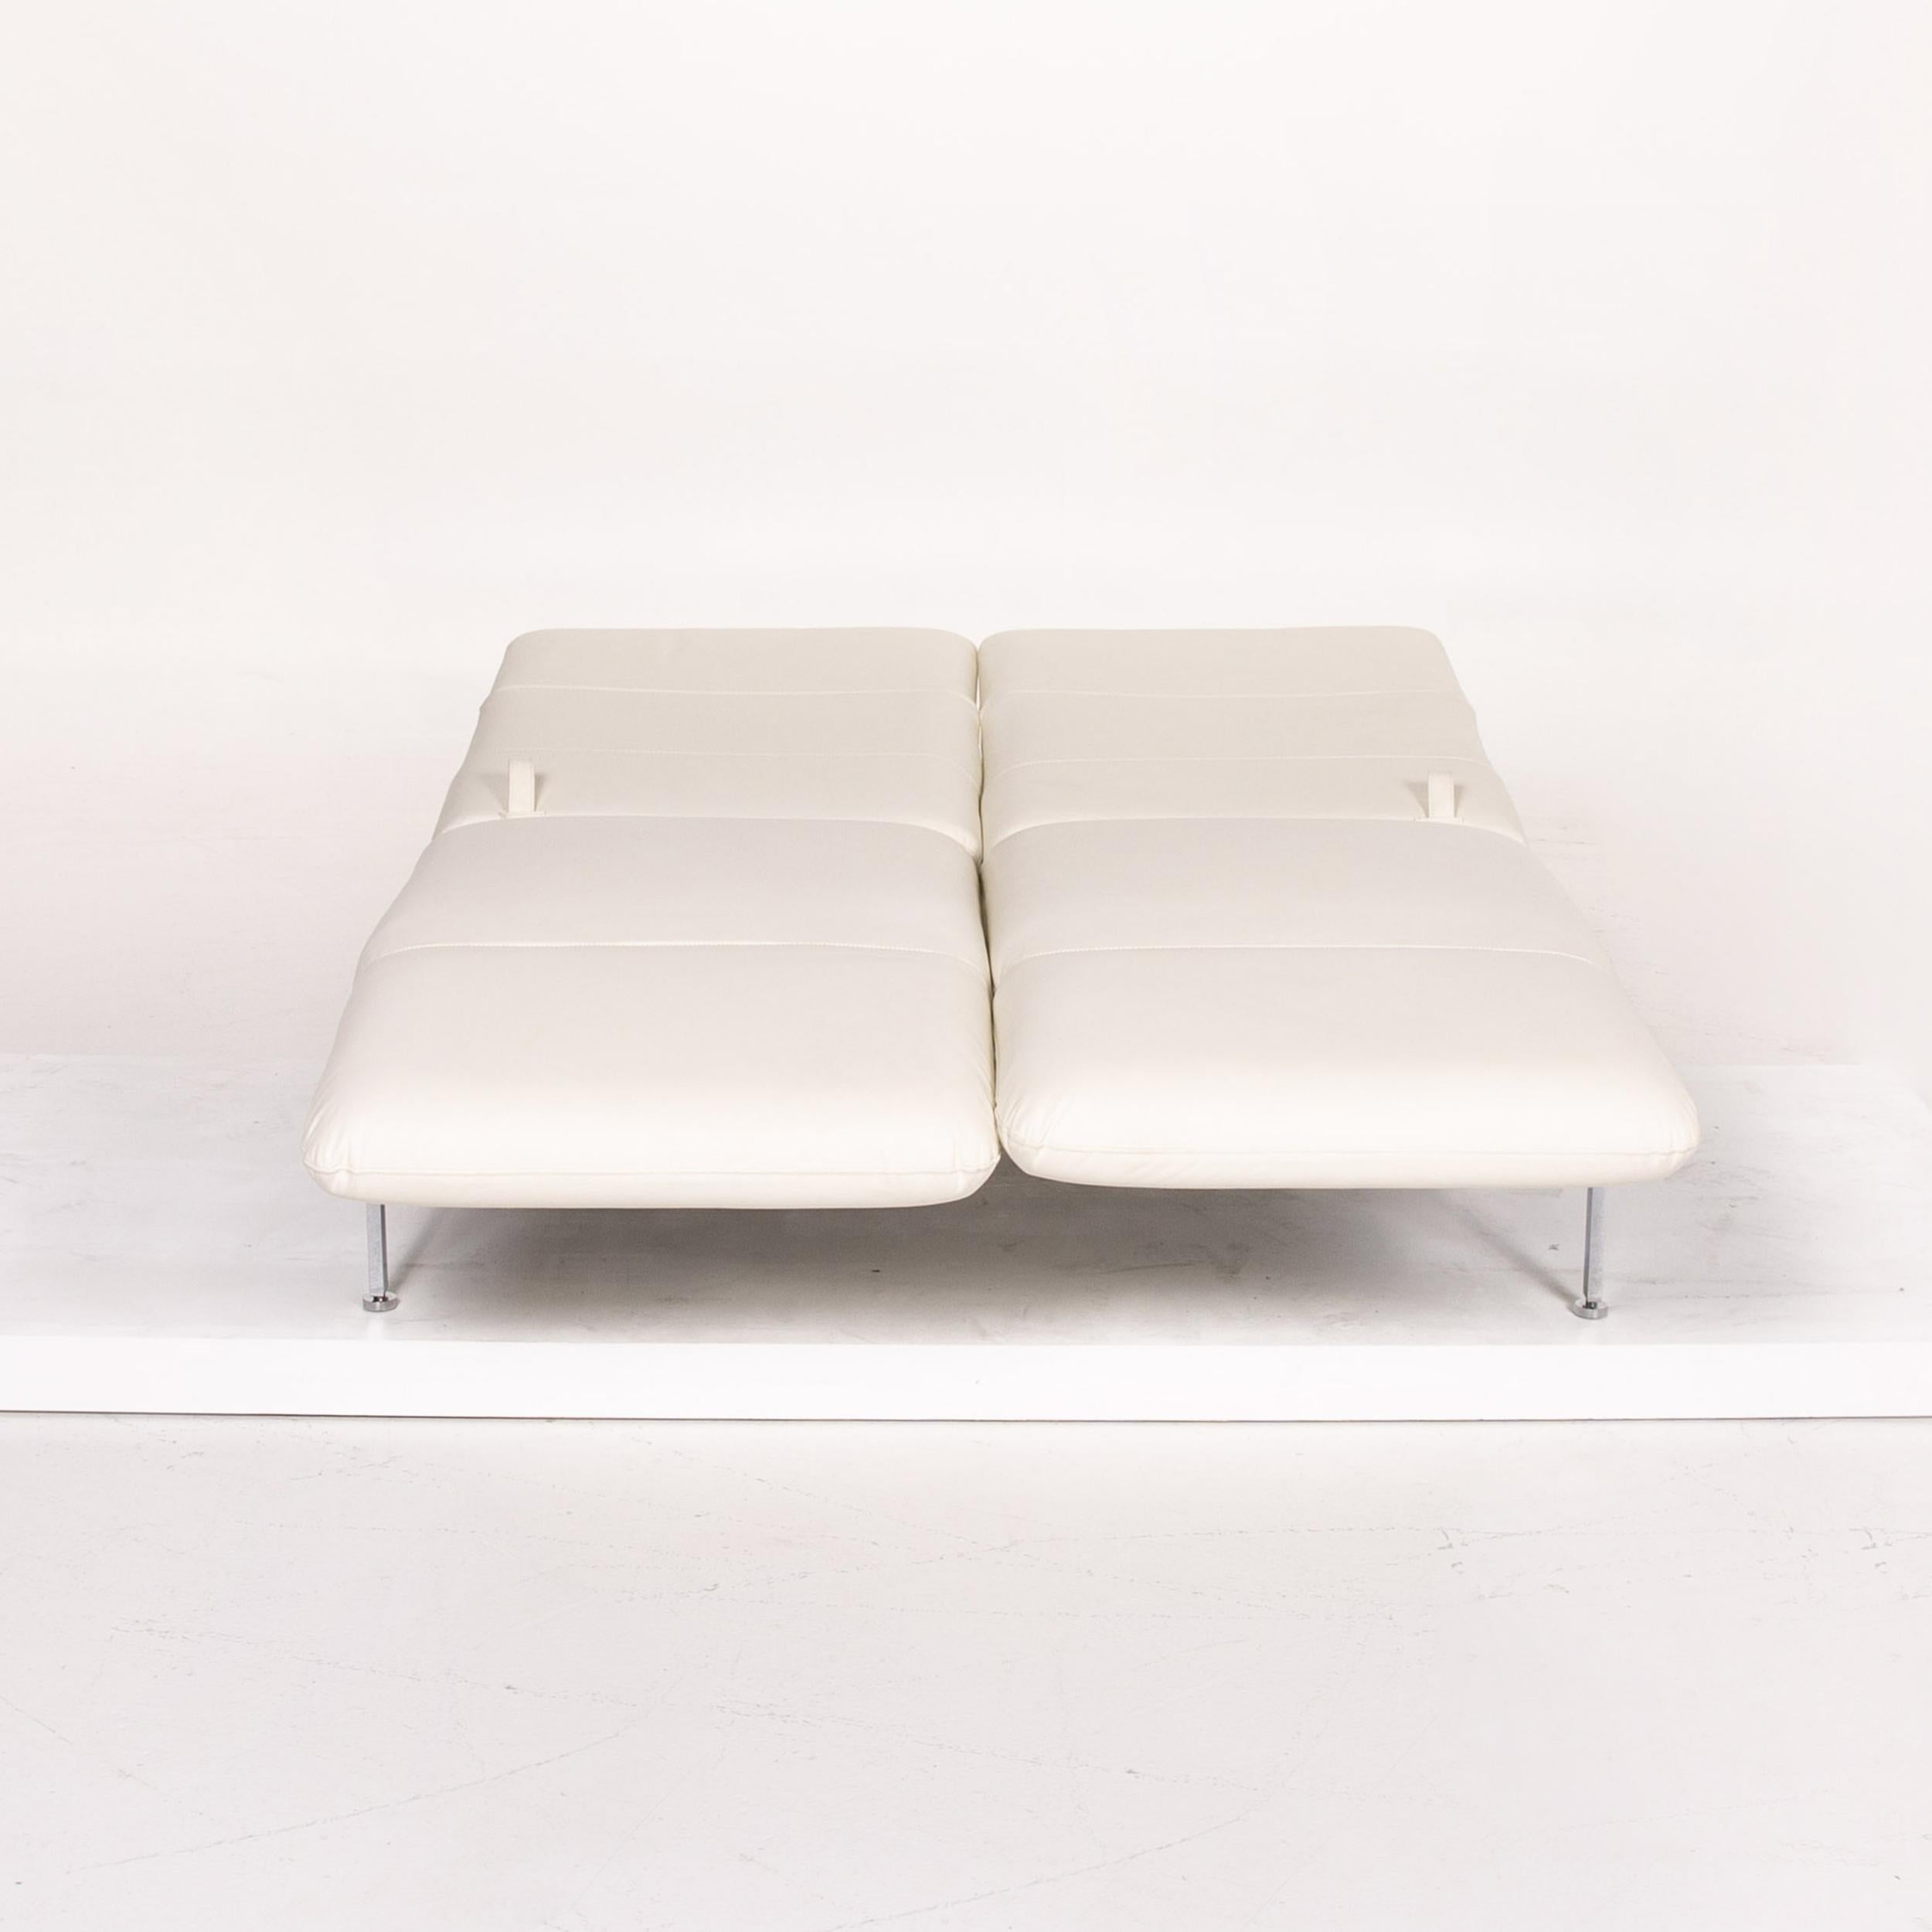 German Brühl & Sippold Roro Leather Sofa White Two-Seat Function Sleeping Function For Sale